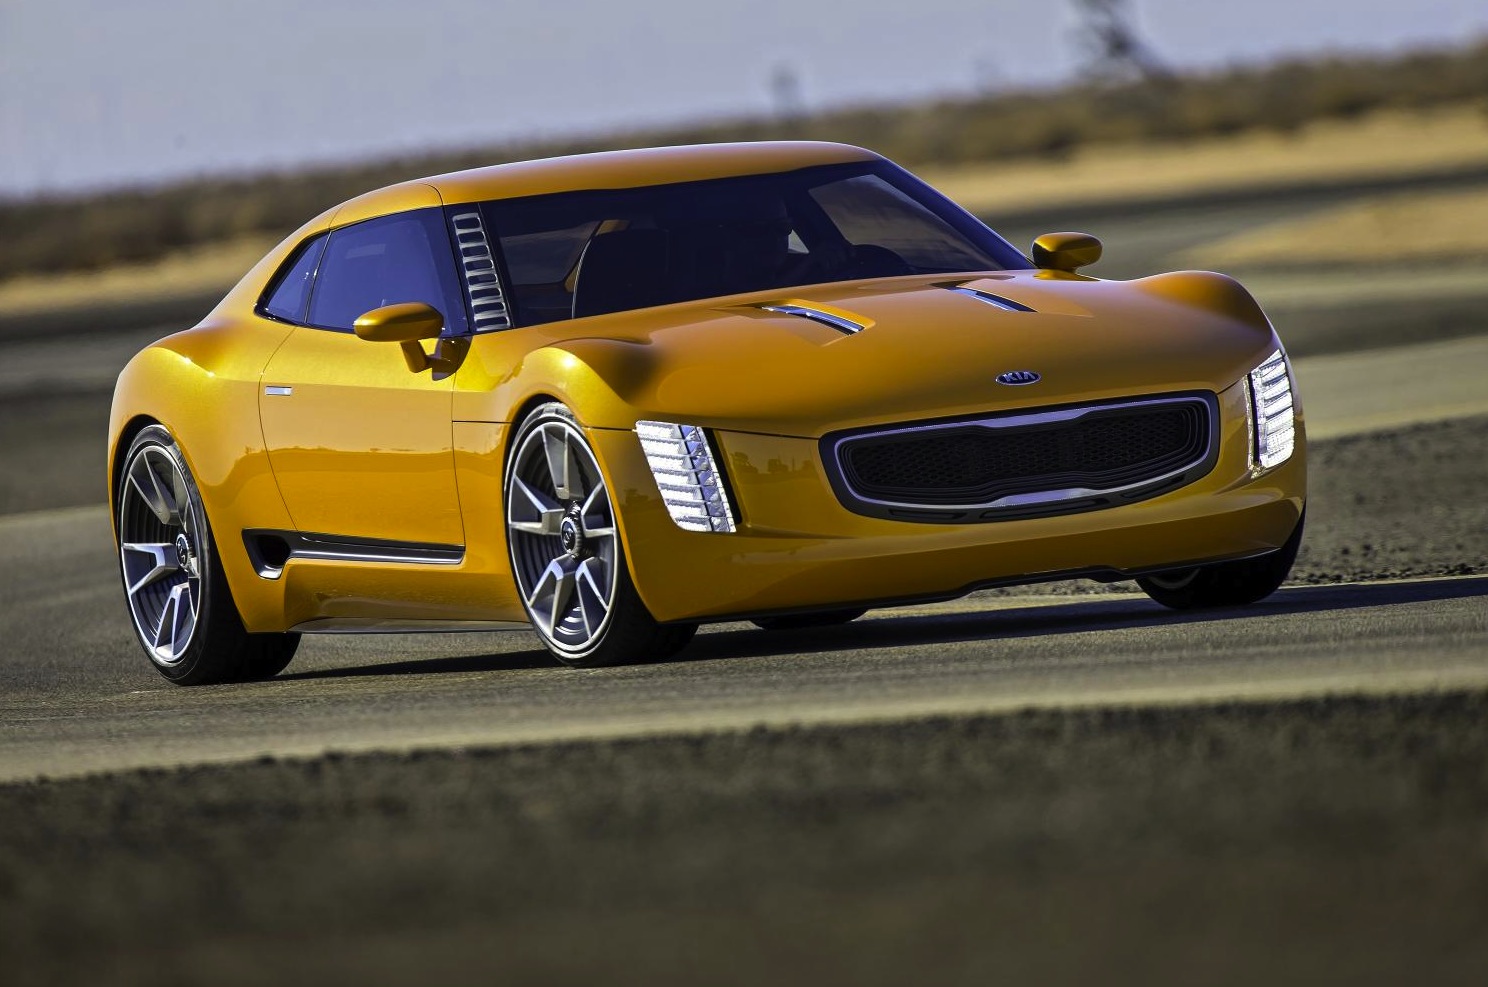 Kia GT4 Stinger to hit showrooms by 2015 – report